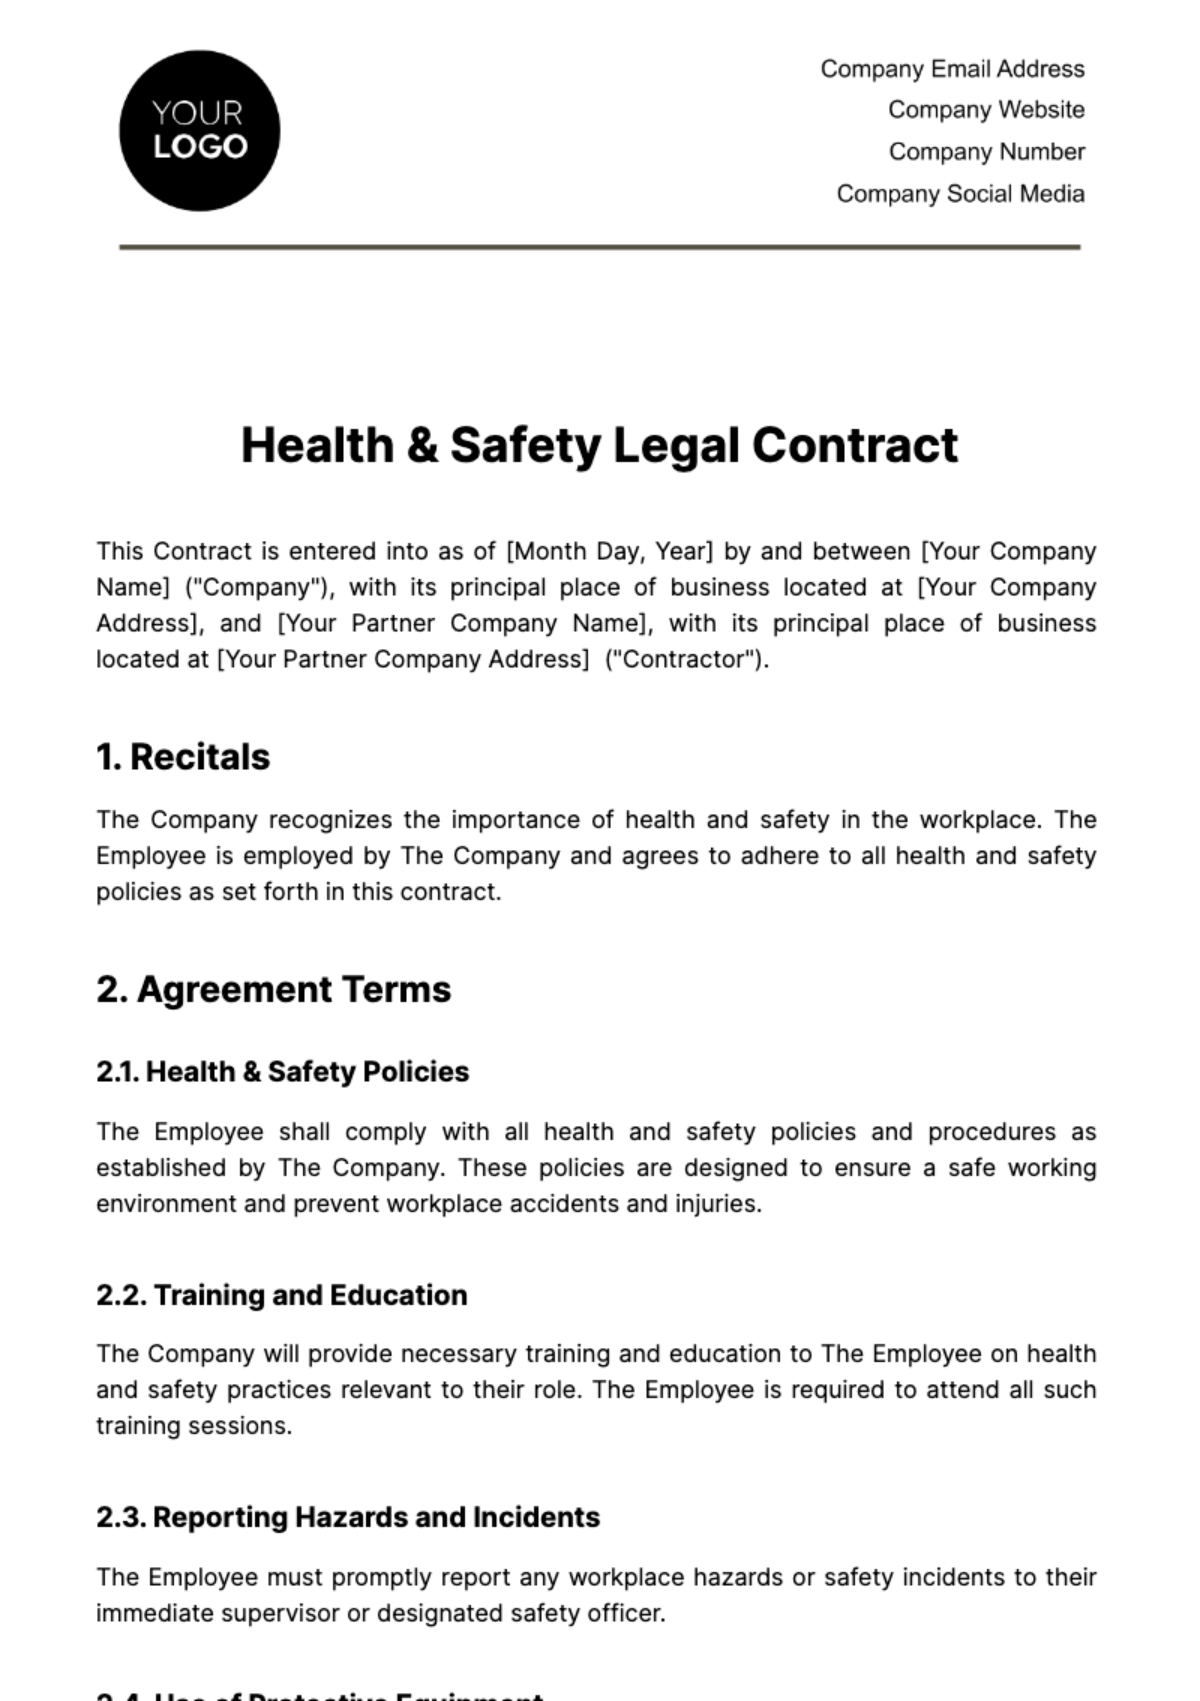 Health & Safety Legal Contract Template